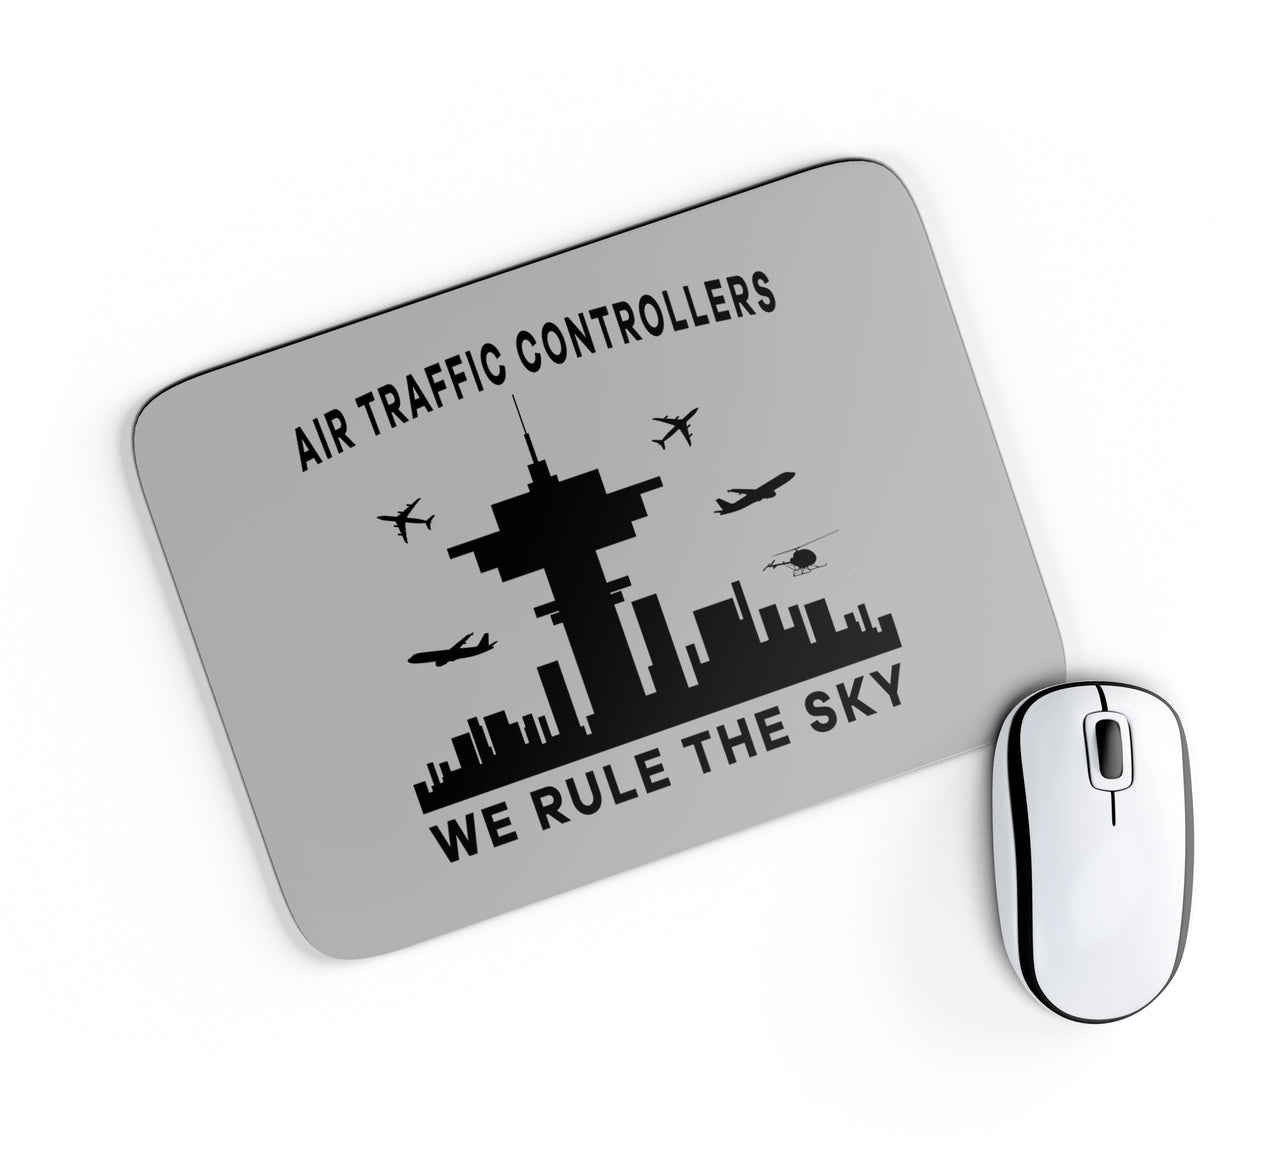 Air Traffic Controllers - We Rule The Sky Designed Mouse Pads